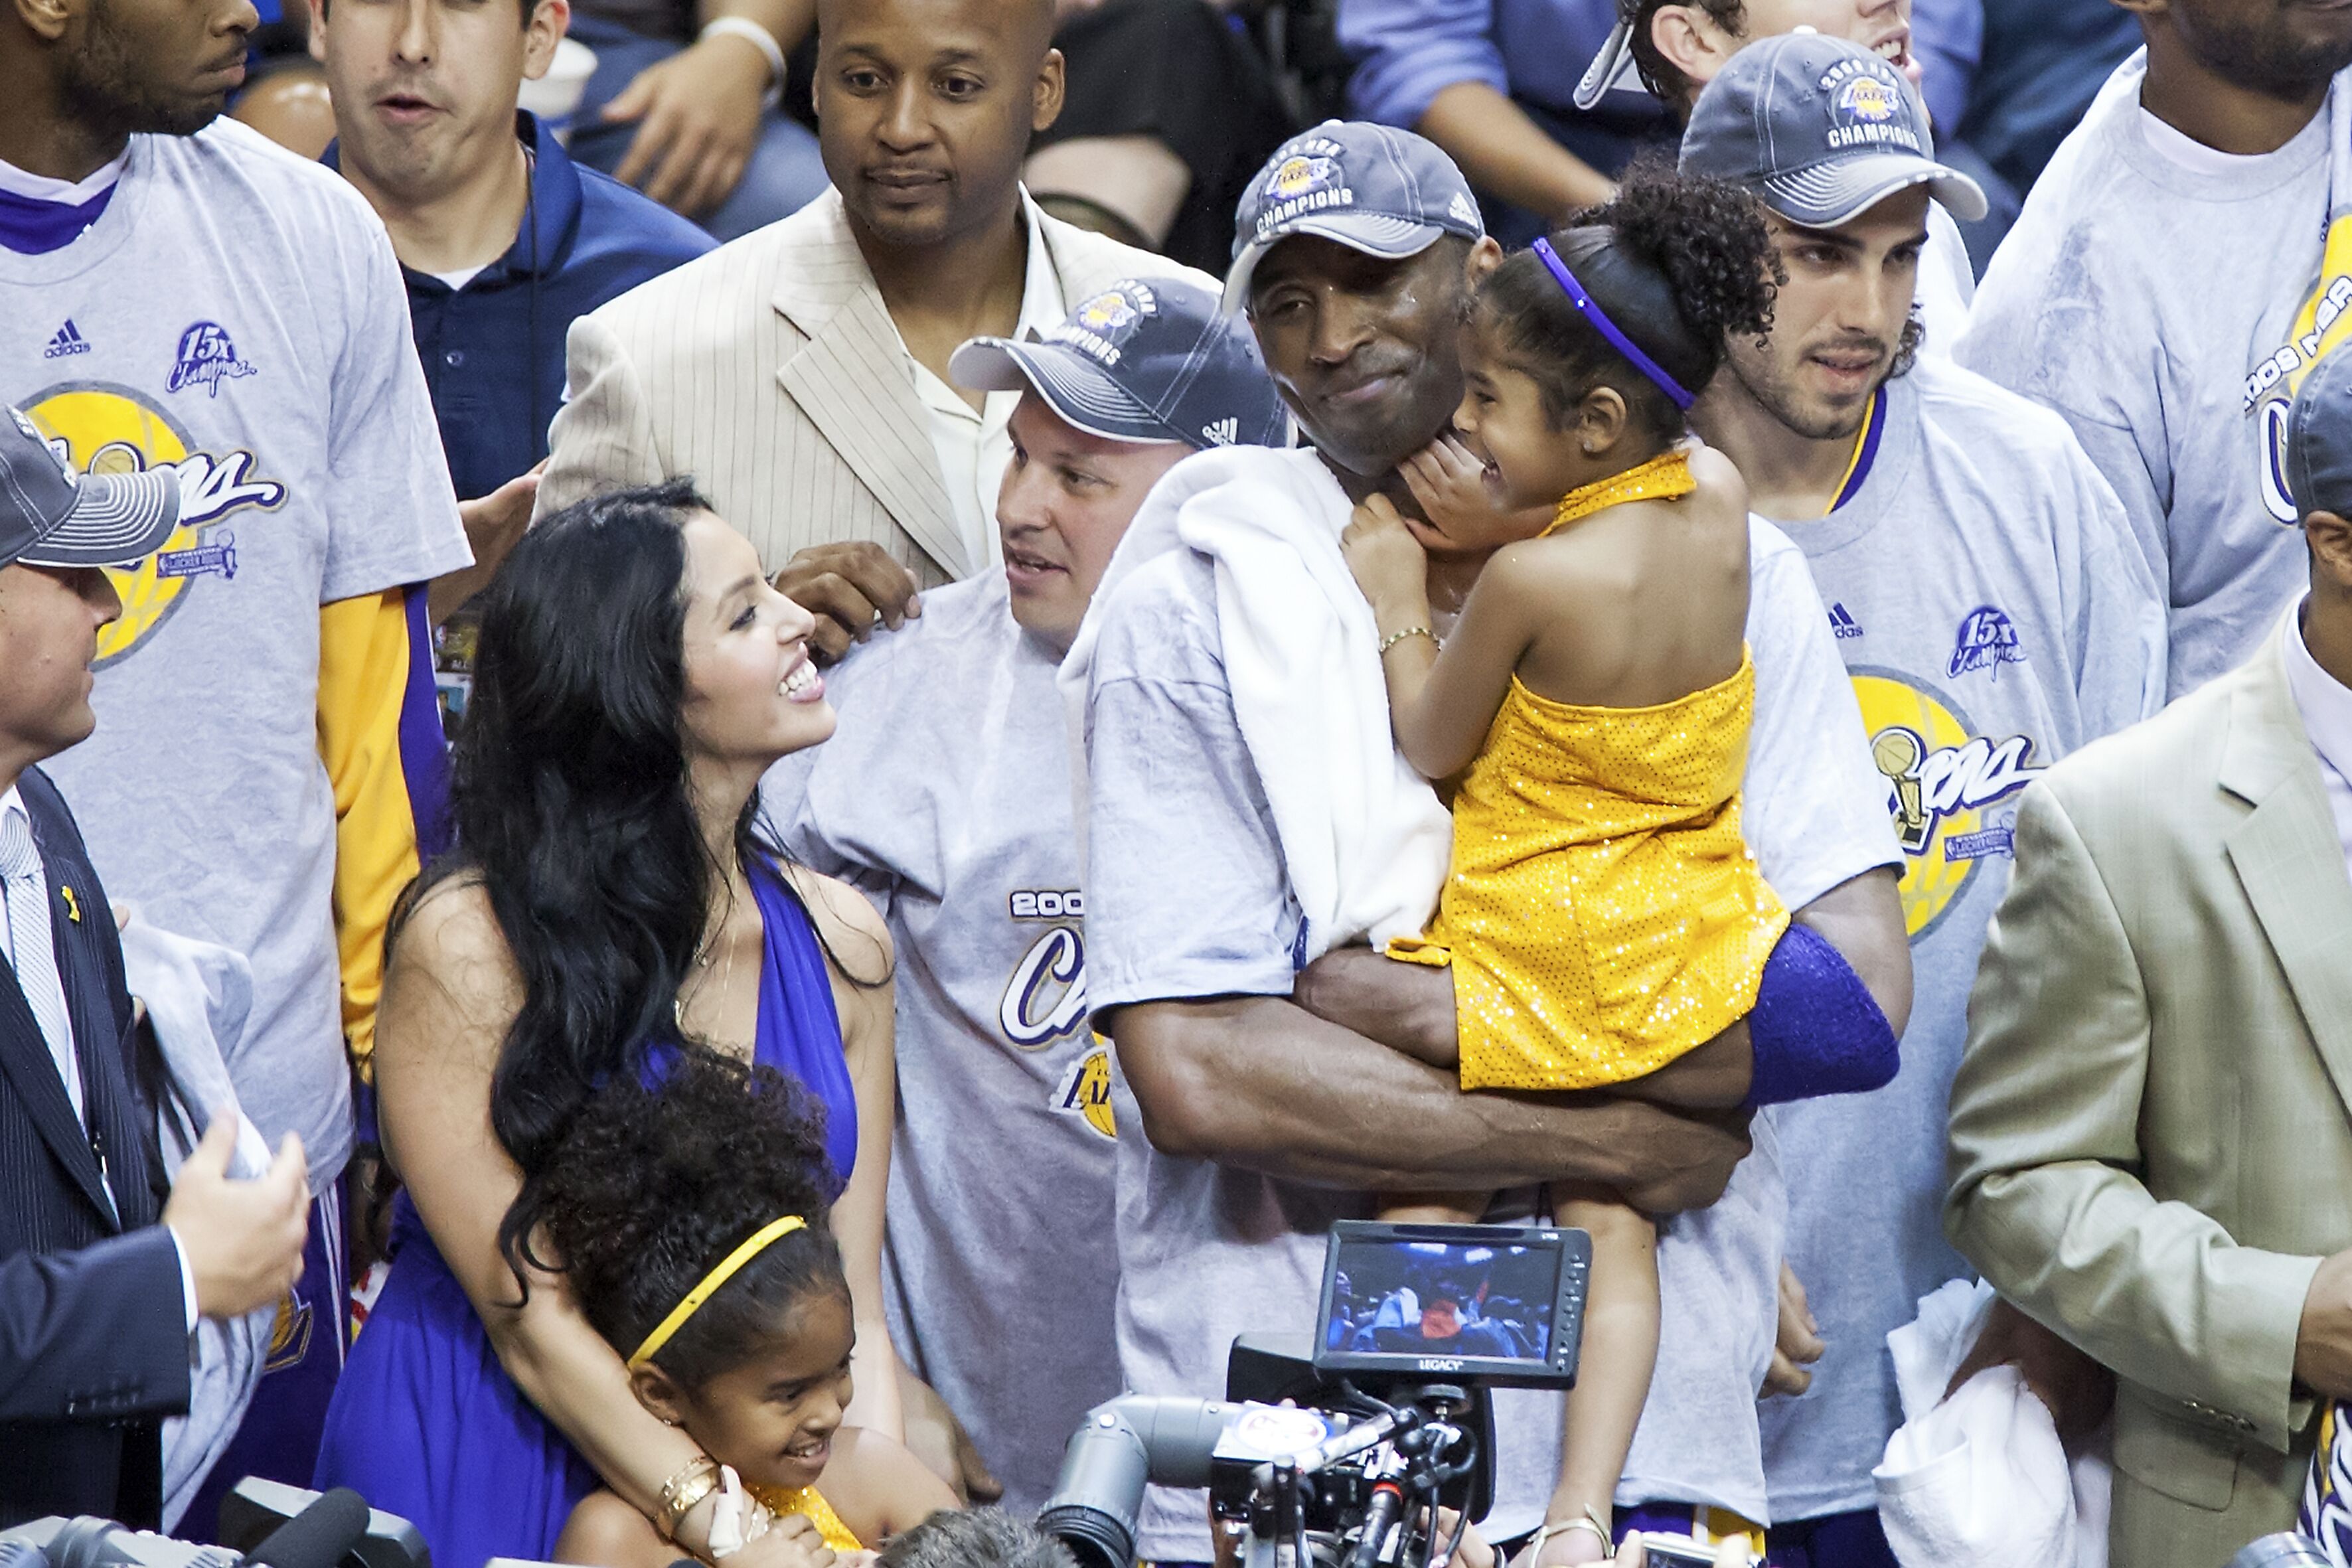 Kobe and Vanessa Bryant celebrate an LA Lakers championship with their daughters Natalia and Gianna | Source: Getty Images/GlobalImagesUkraine